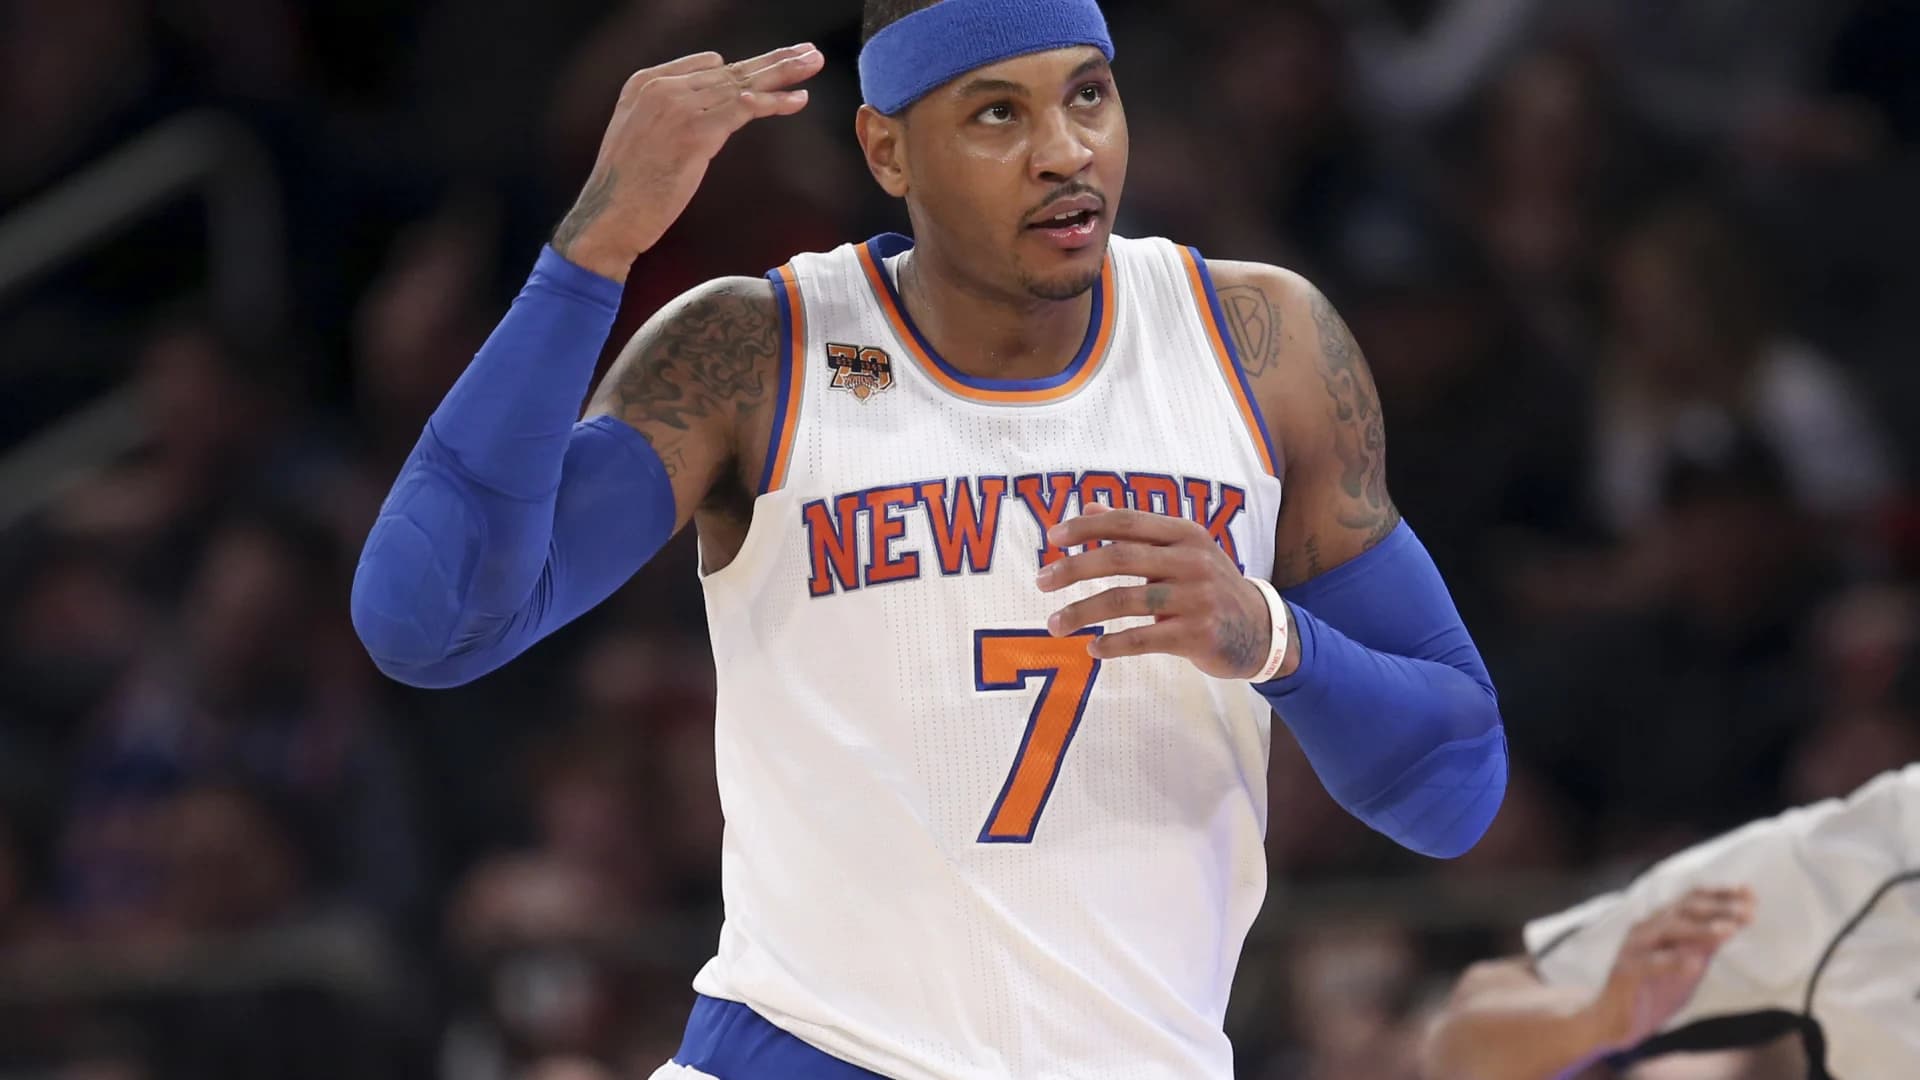 Carmelo Anthony retires from NBA, after 19-year career, NCAA title, 3 Olympic gold medals